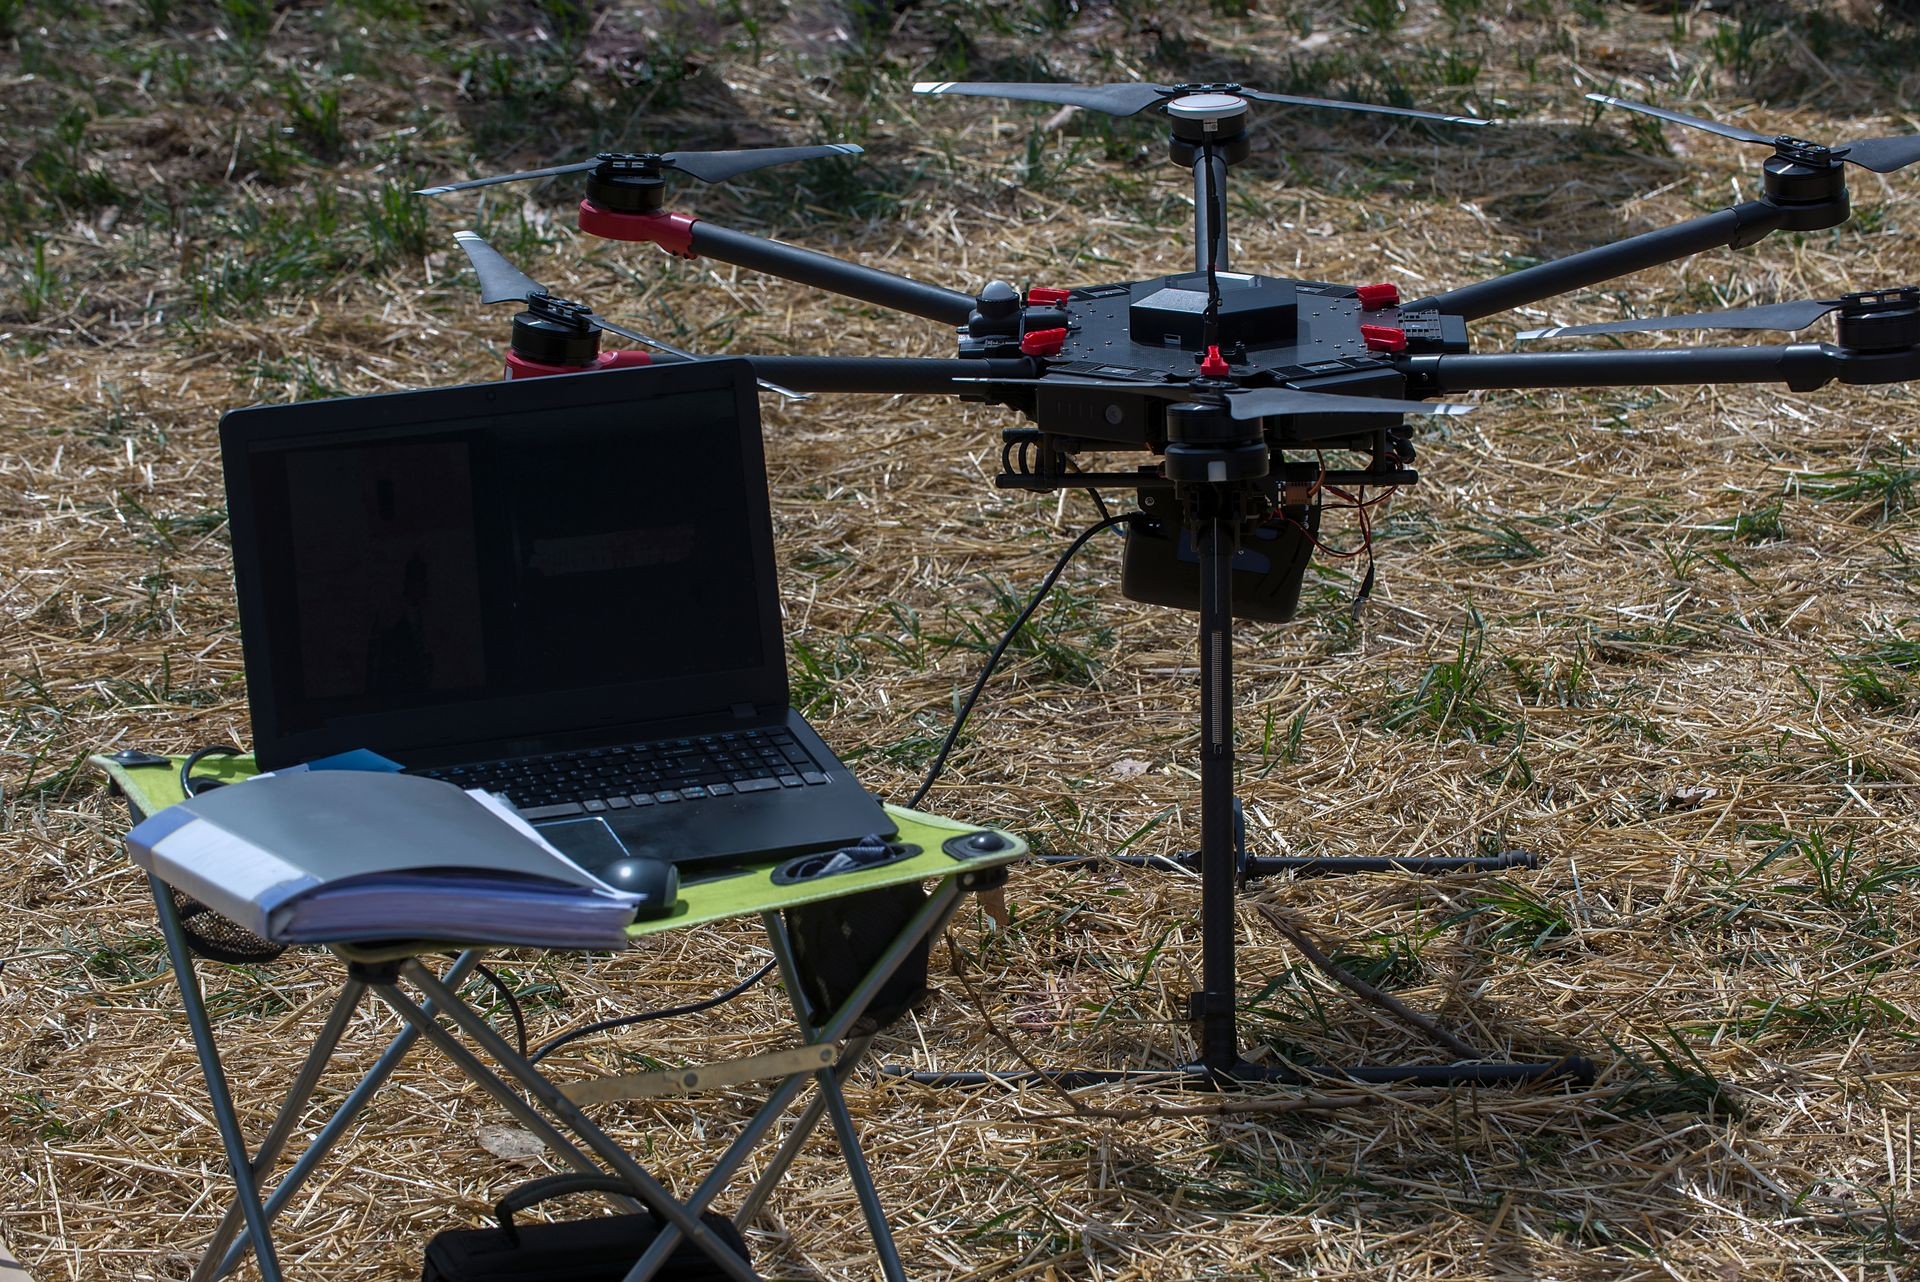 drones in the service in agriculture